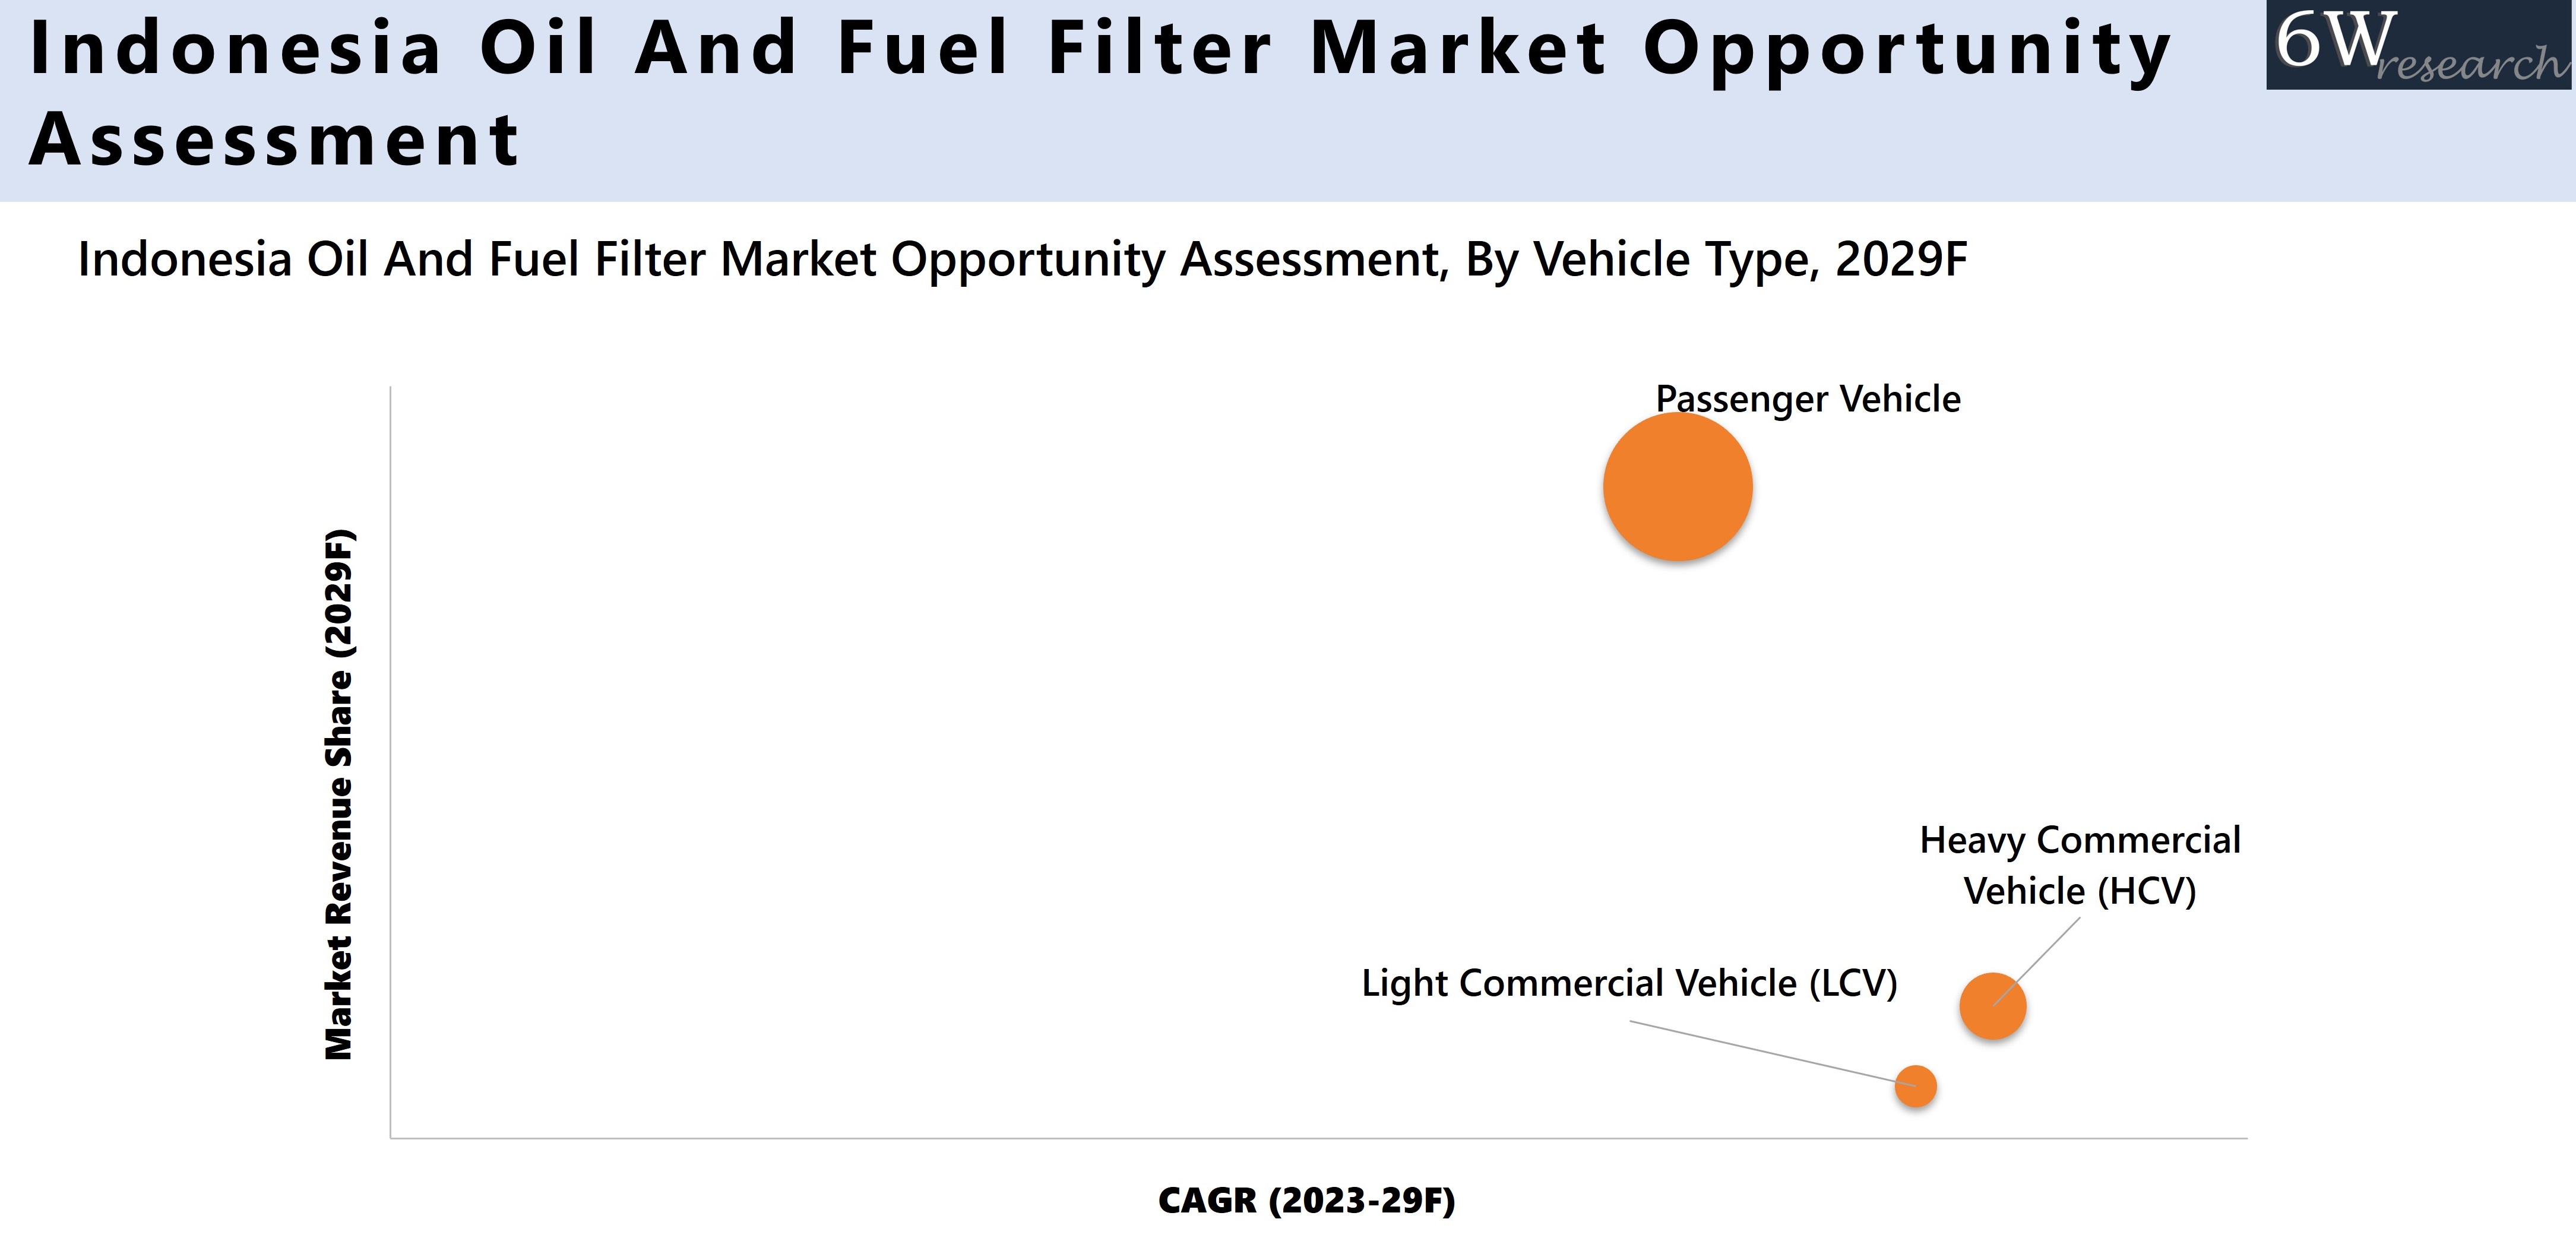 Indonesia Oil And Fuel Filter Market Opportunity Assessment